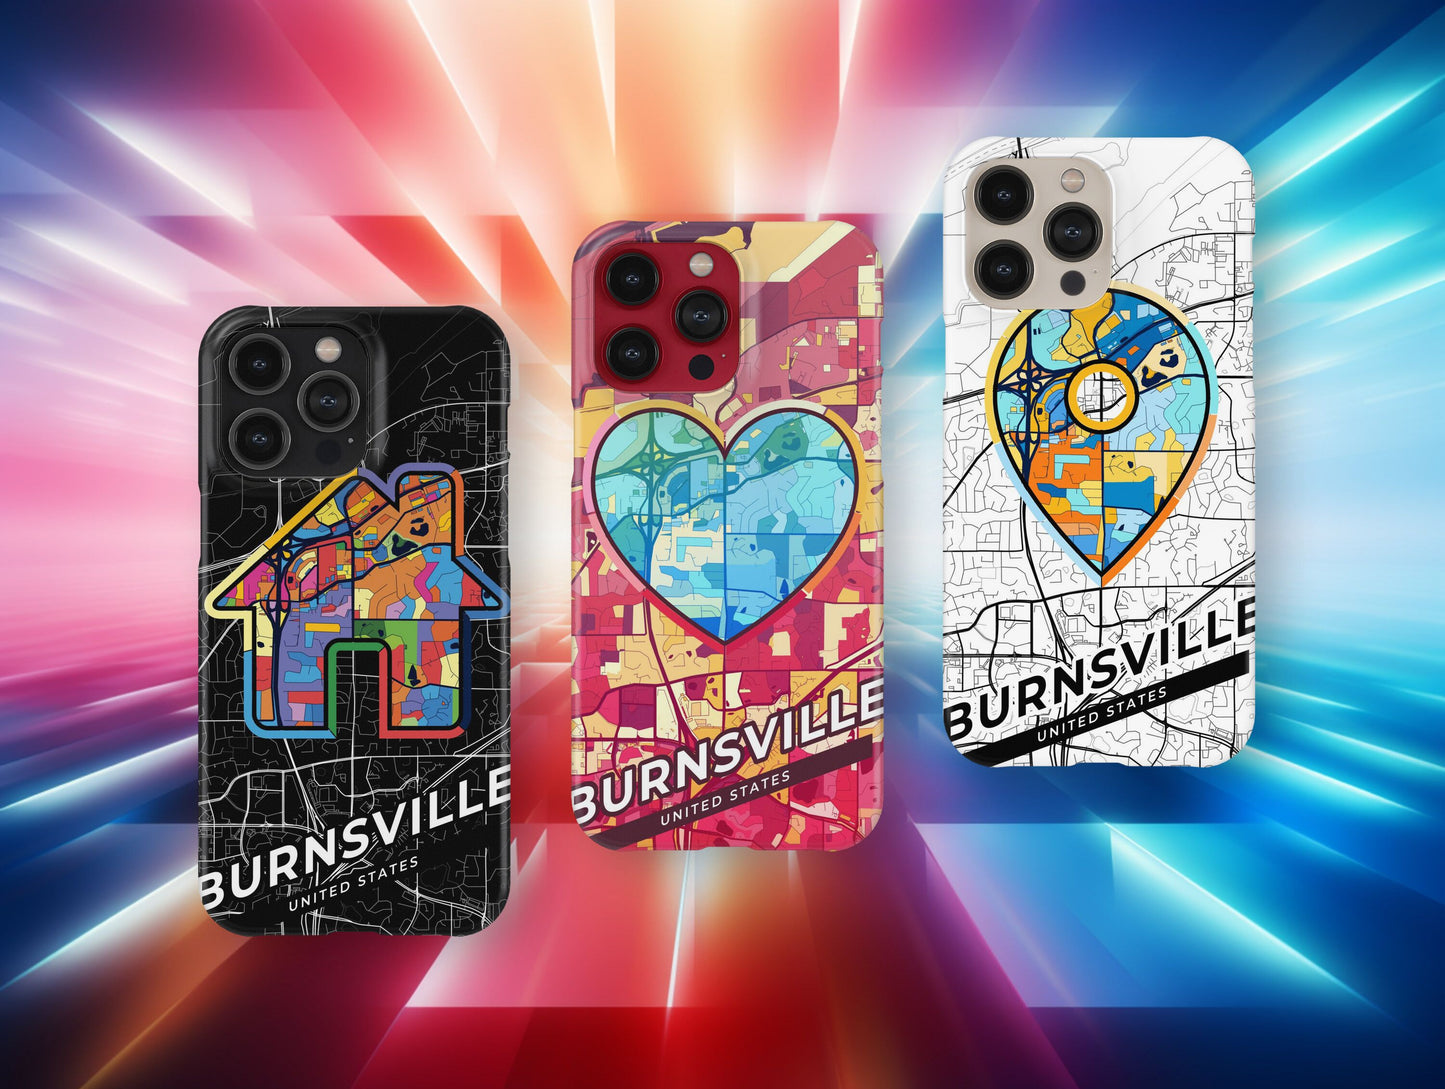 Burnsville Minnesota slim phone case with colorful icon. Birthday, wedding or housewarming gift. Couple match cases.